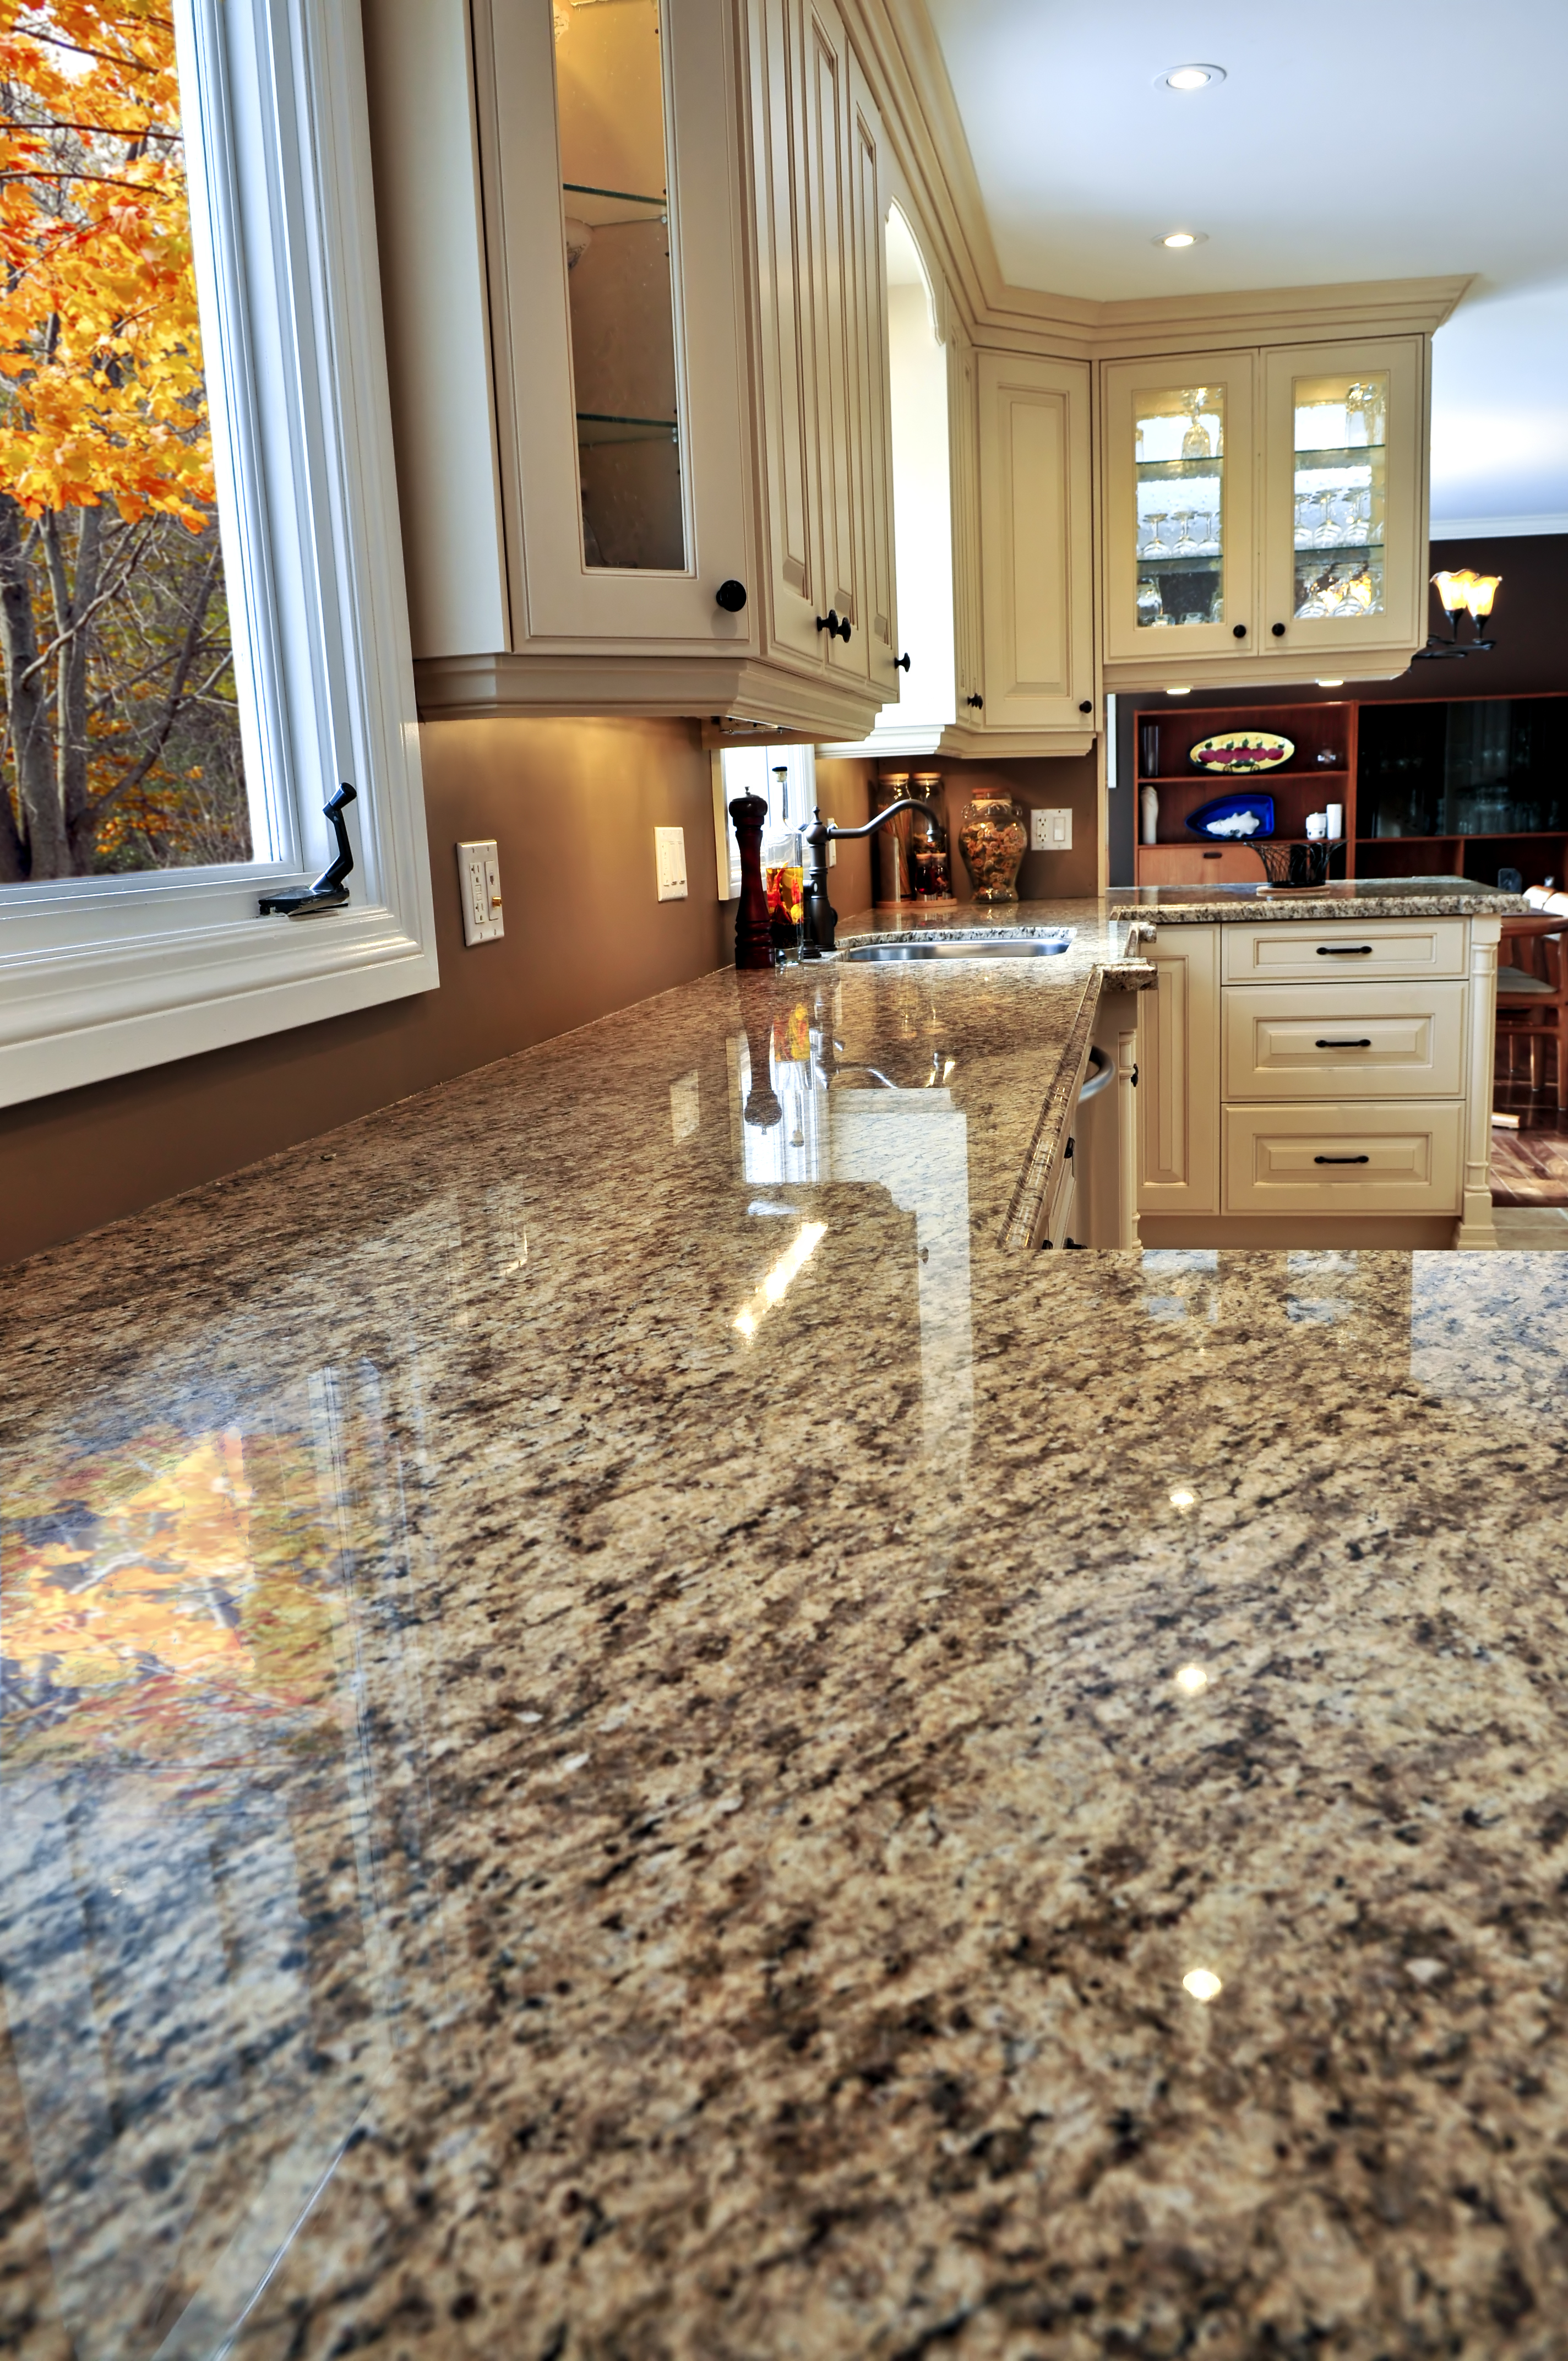 7 Common Kitchen Countertop Problems, How To Separate Granite Countertops From Cabinets